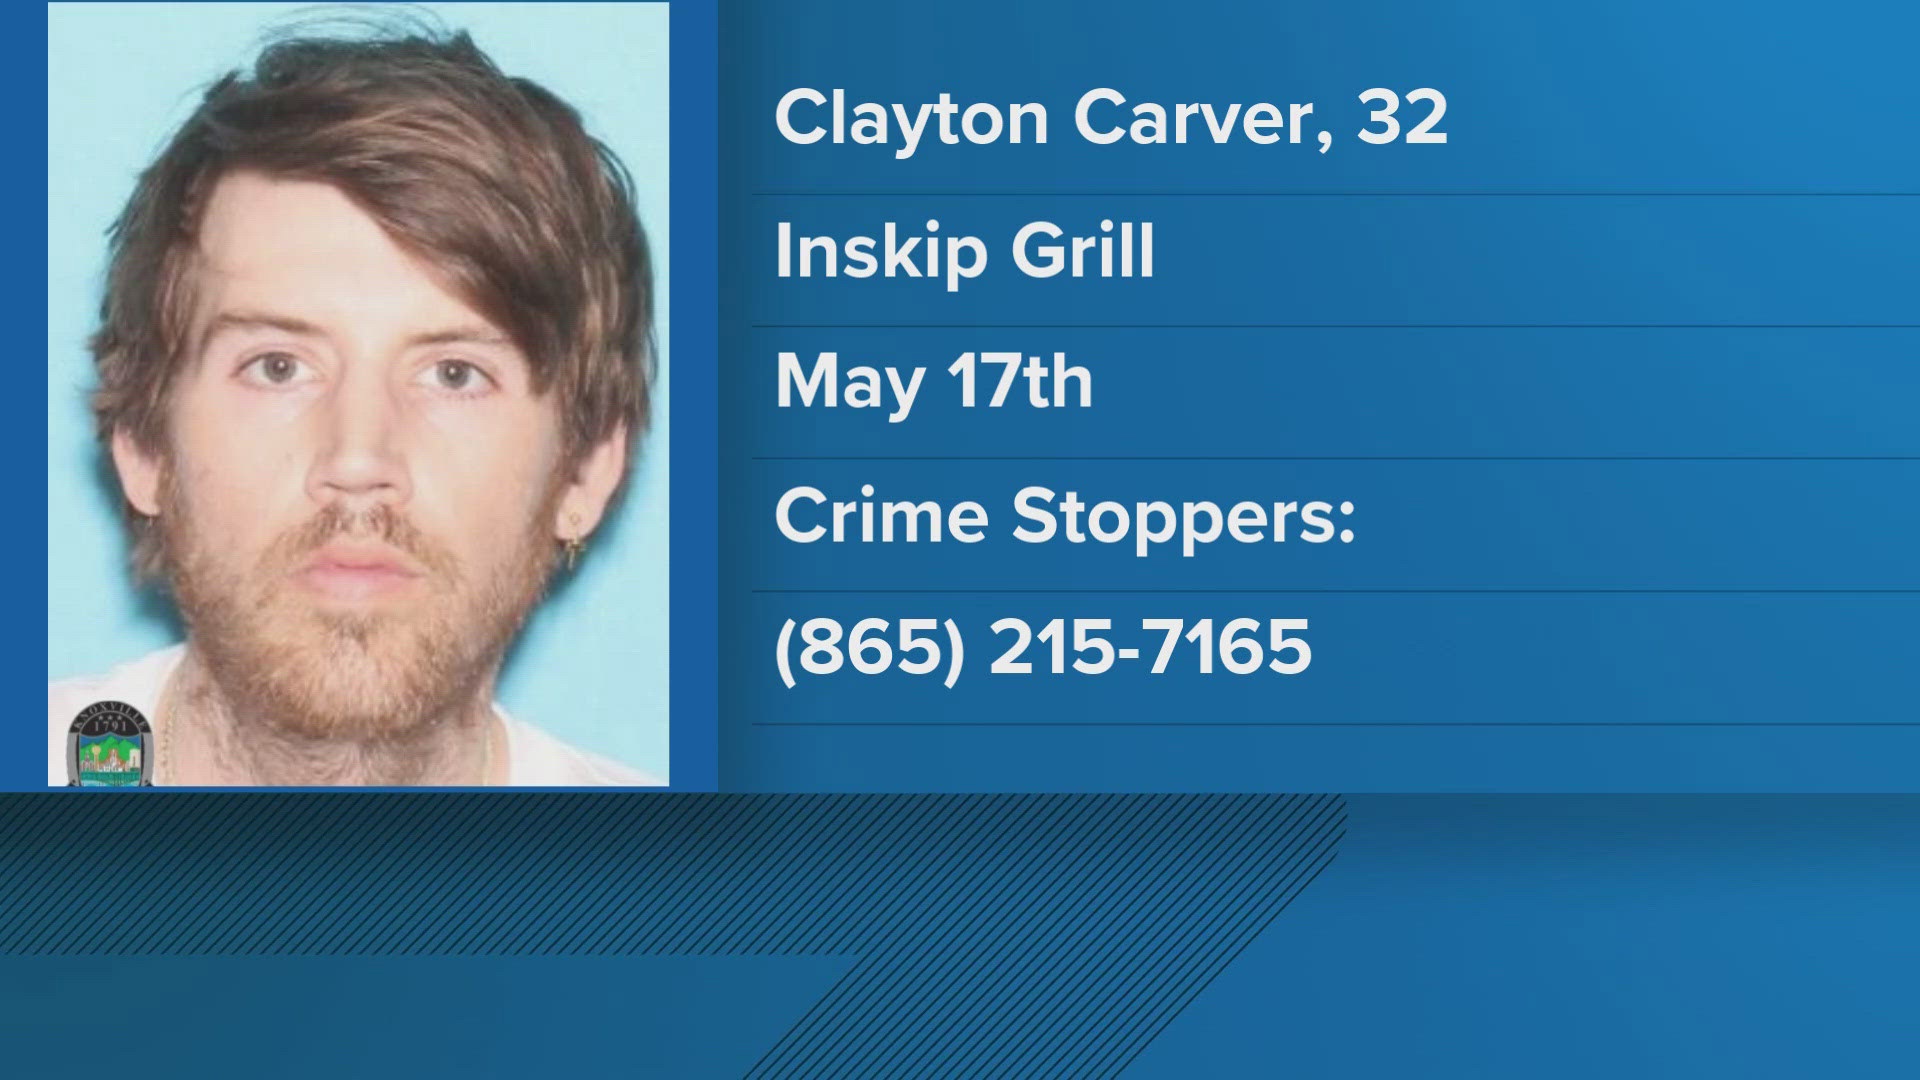 The Knoxville Police Department said Clayton Carver was reportedly last seen at the Inskip Grill.